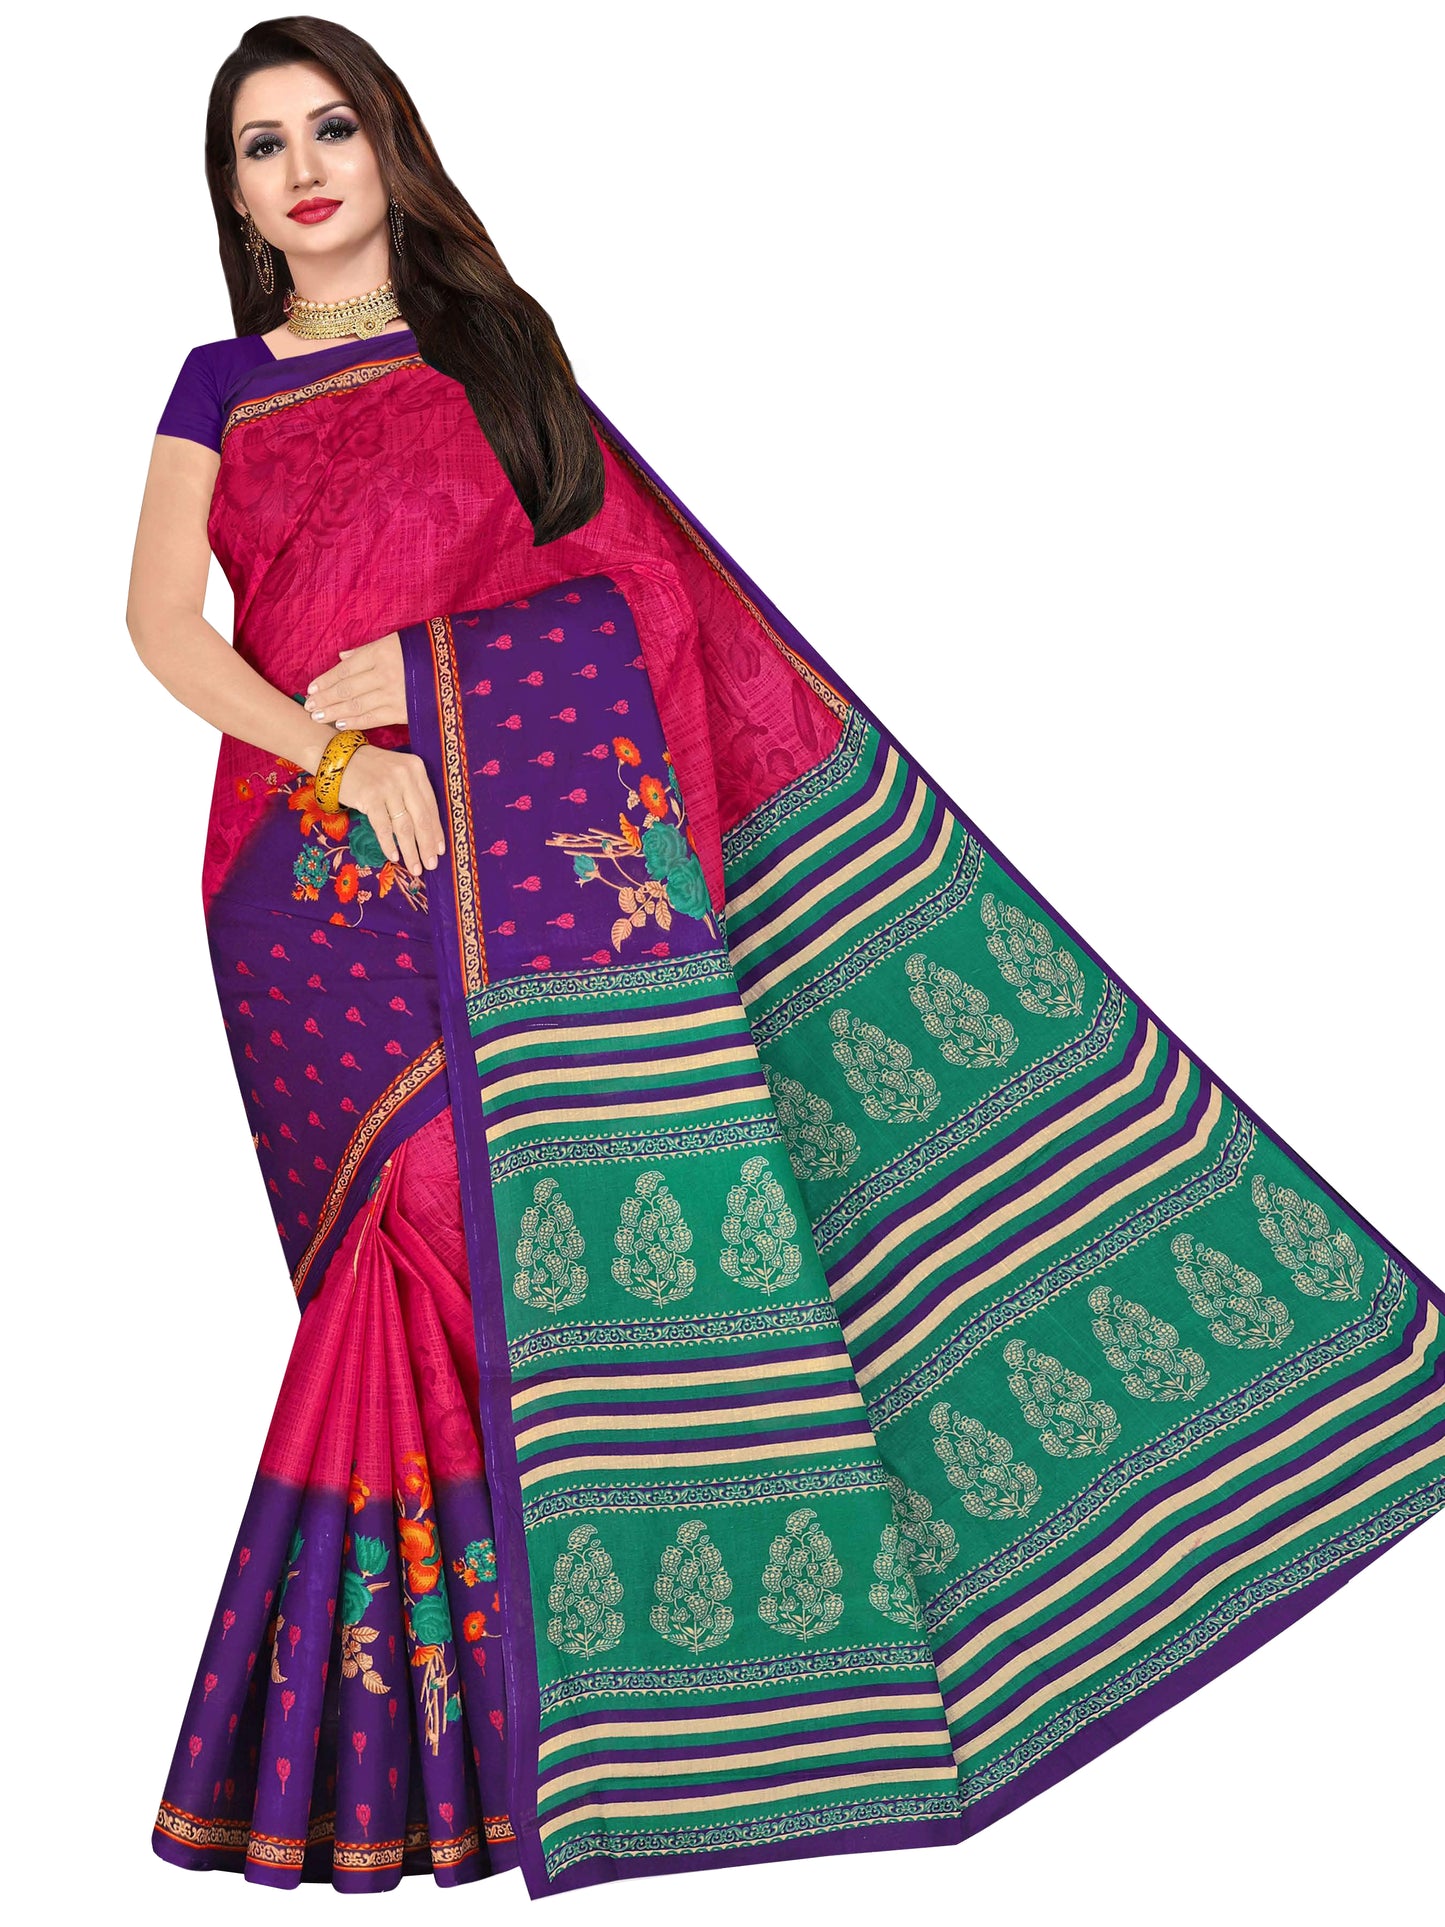 Pure Cotton Saree for Women, Casual Wear (Item Code: XYZCCSKR6)